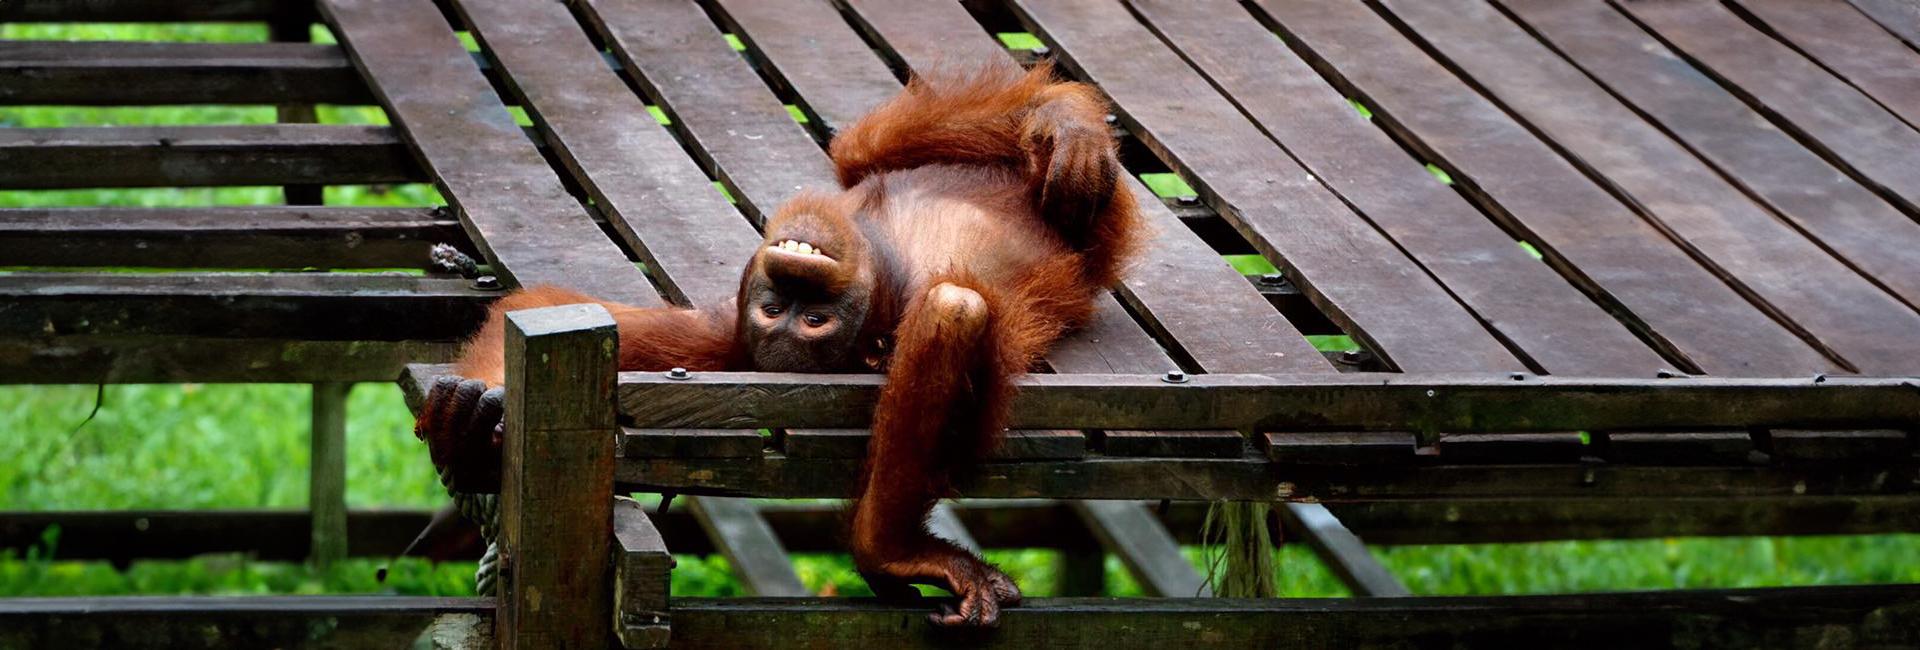 The Benefits Of Enrichment At The Great Orangutan Project - In The Project Coordinator's Own Words!